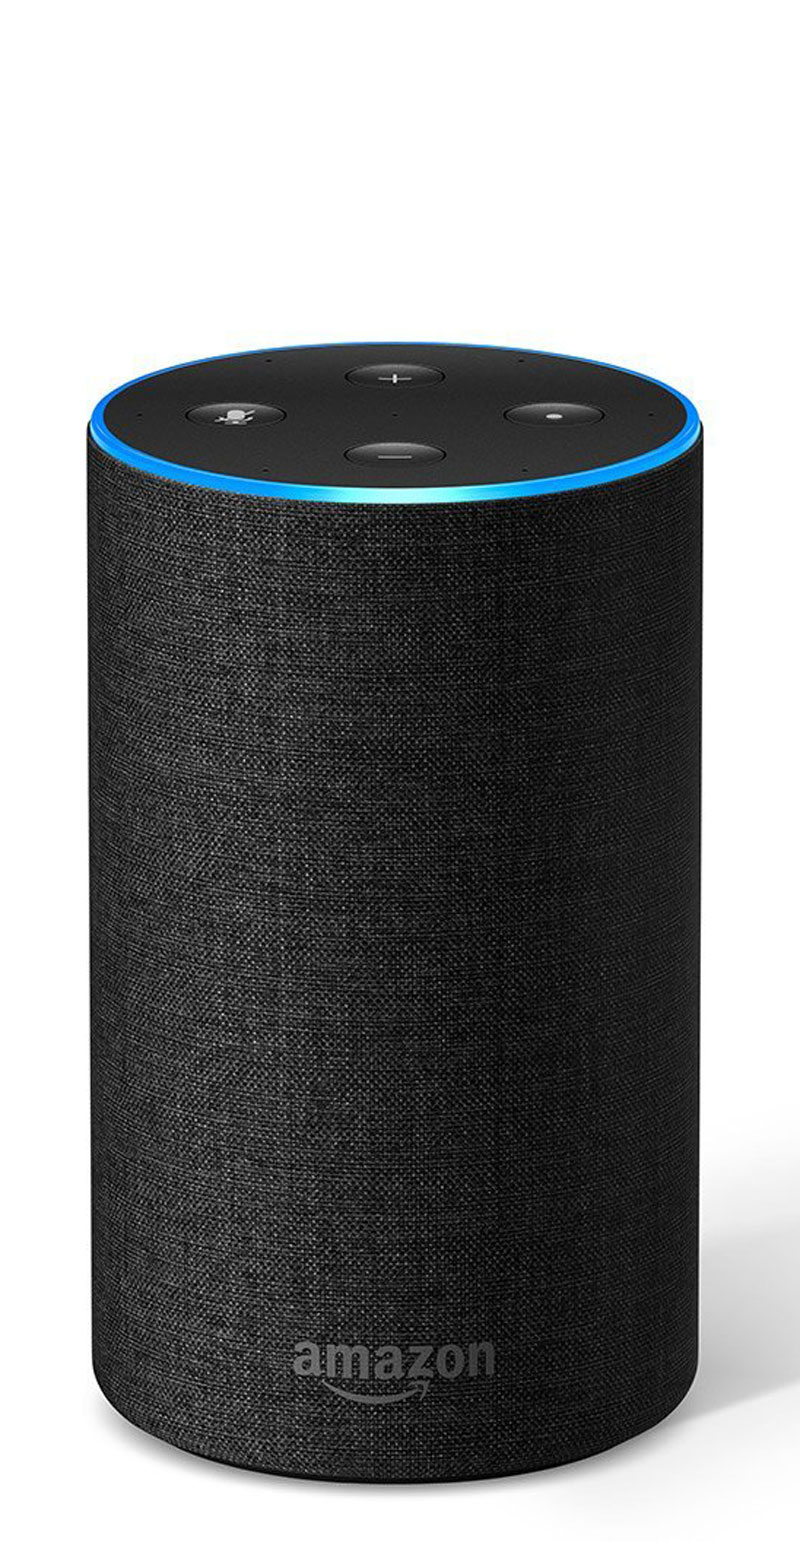 Which Version Of Amazon Echo Should You Buy?